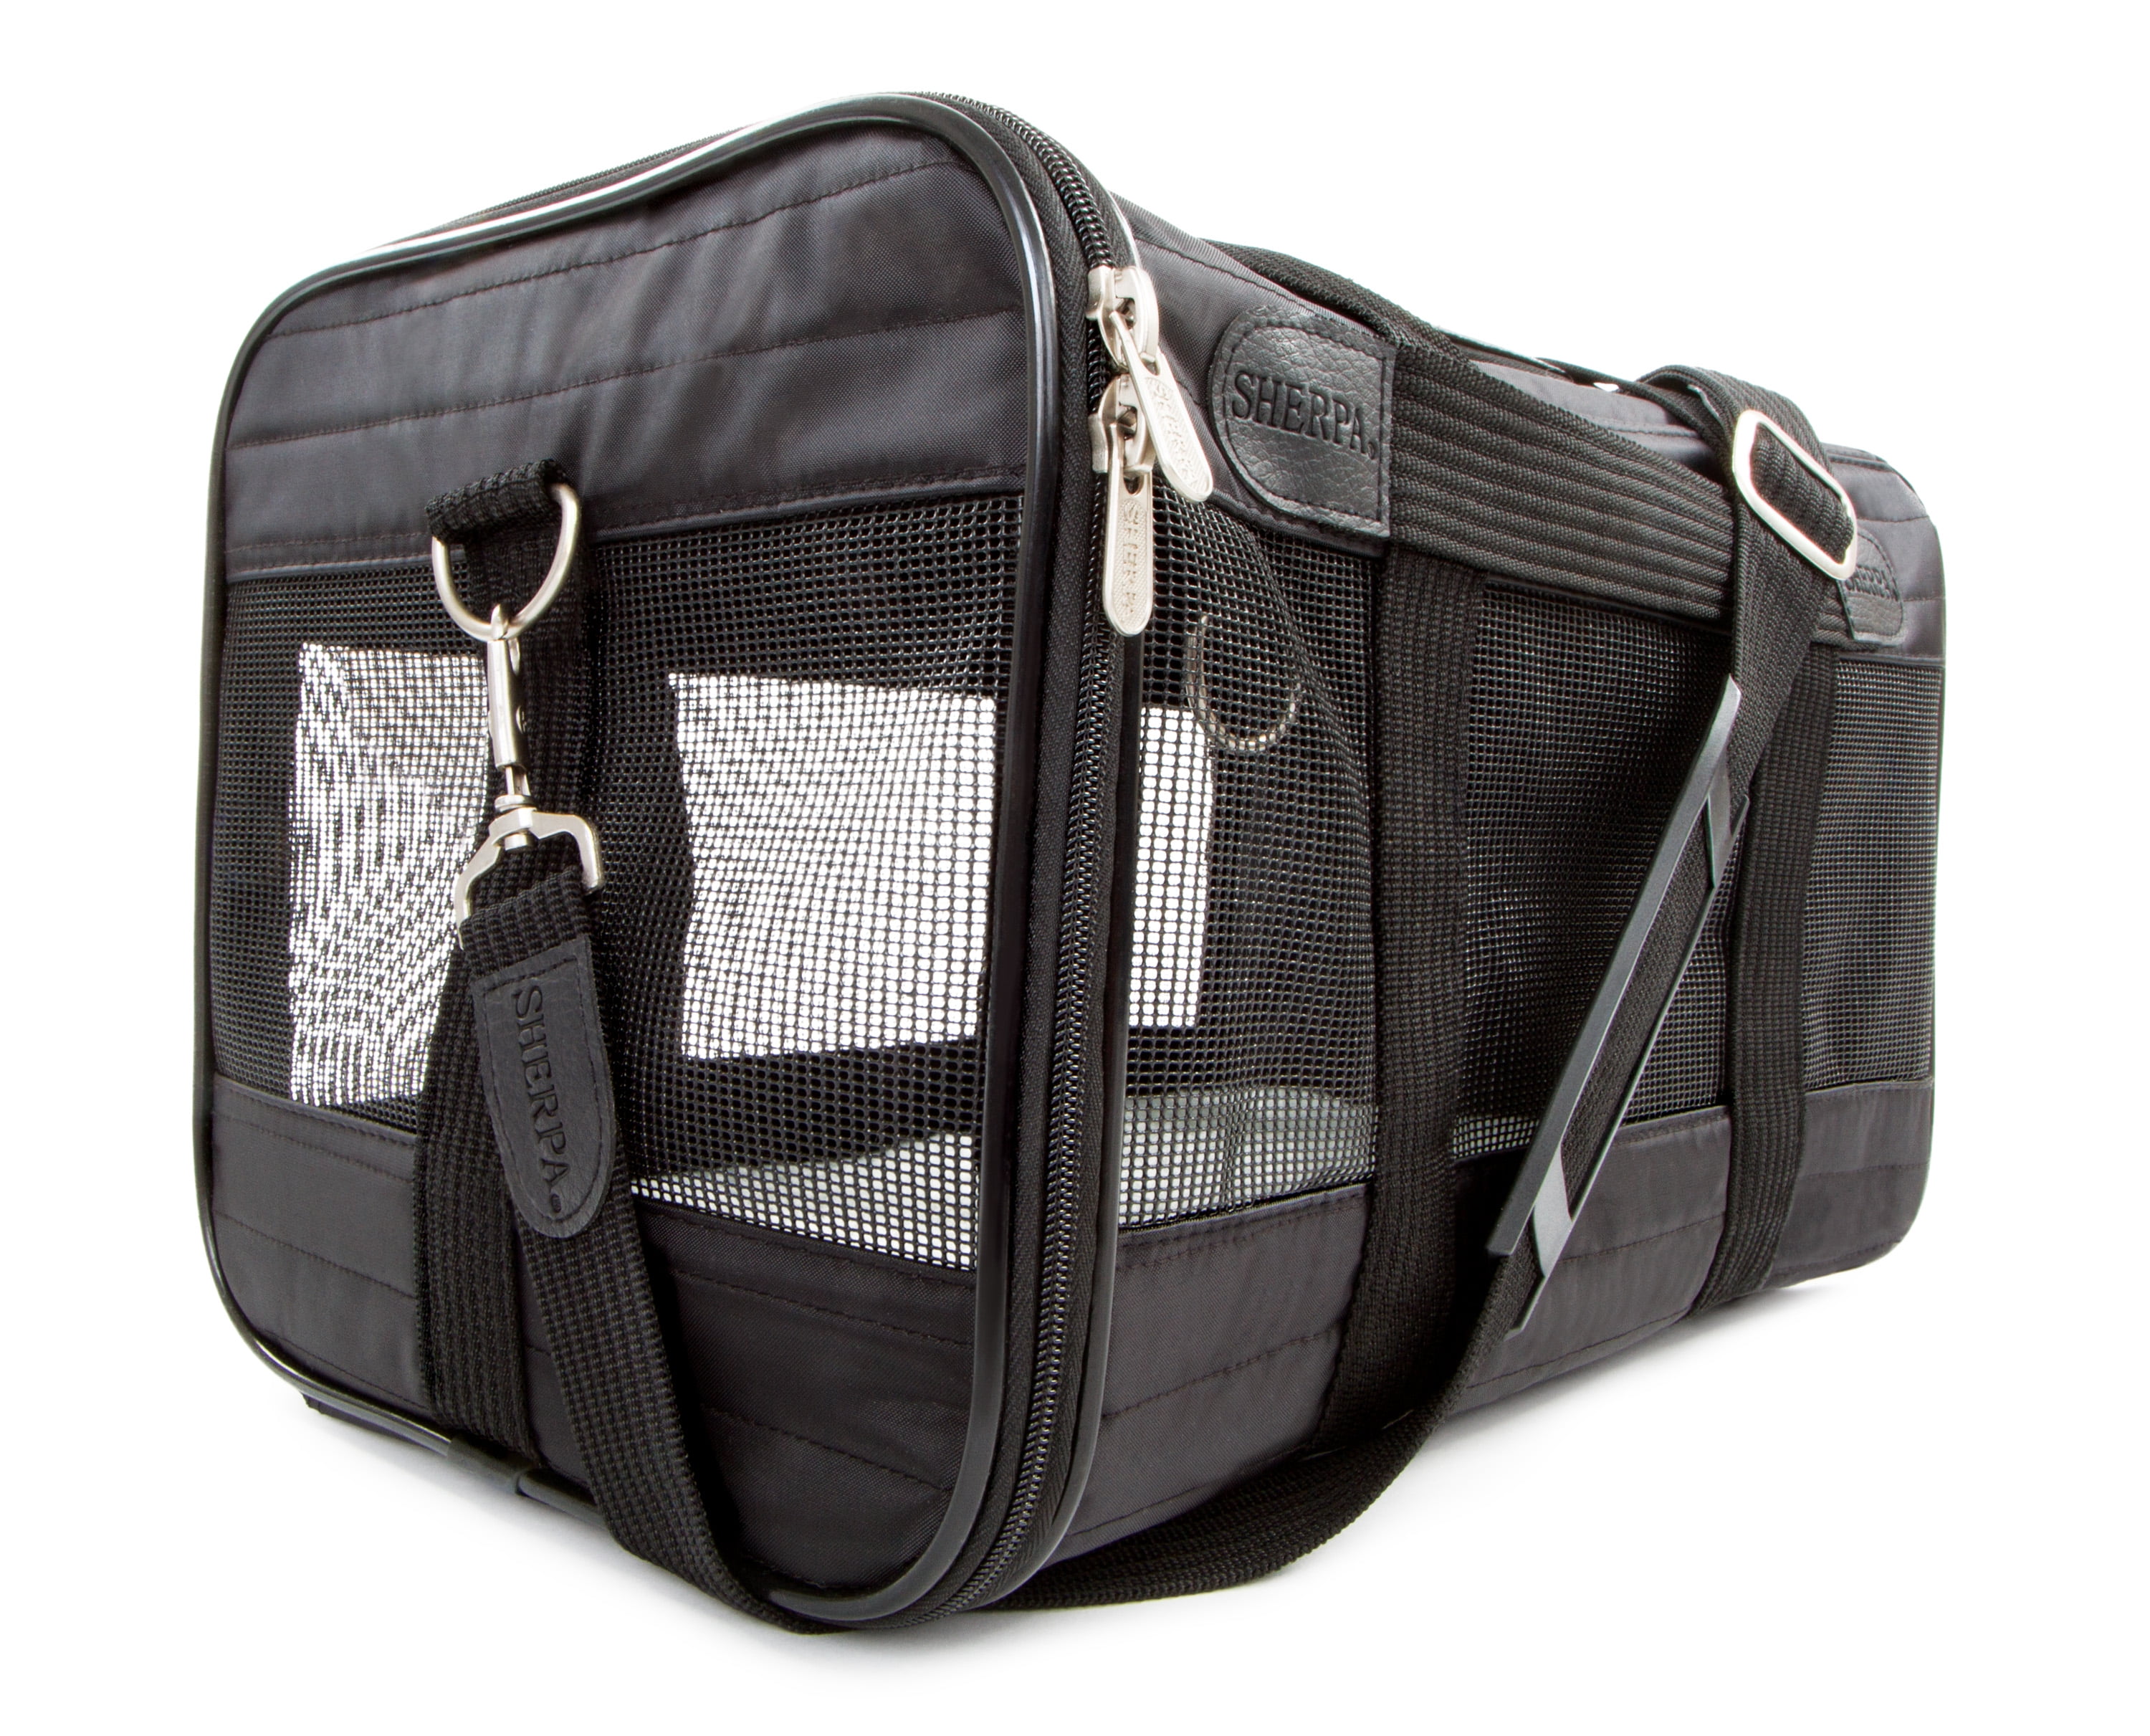 Buy Sherpa Travel Original Deluxe Airline Approved Pet Carrier